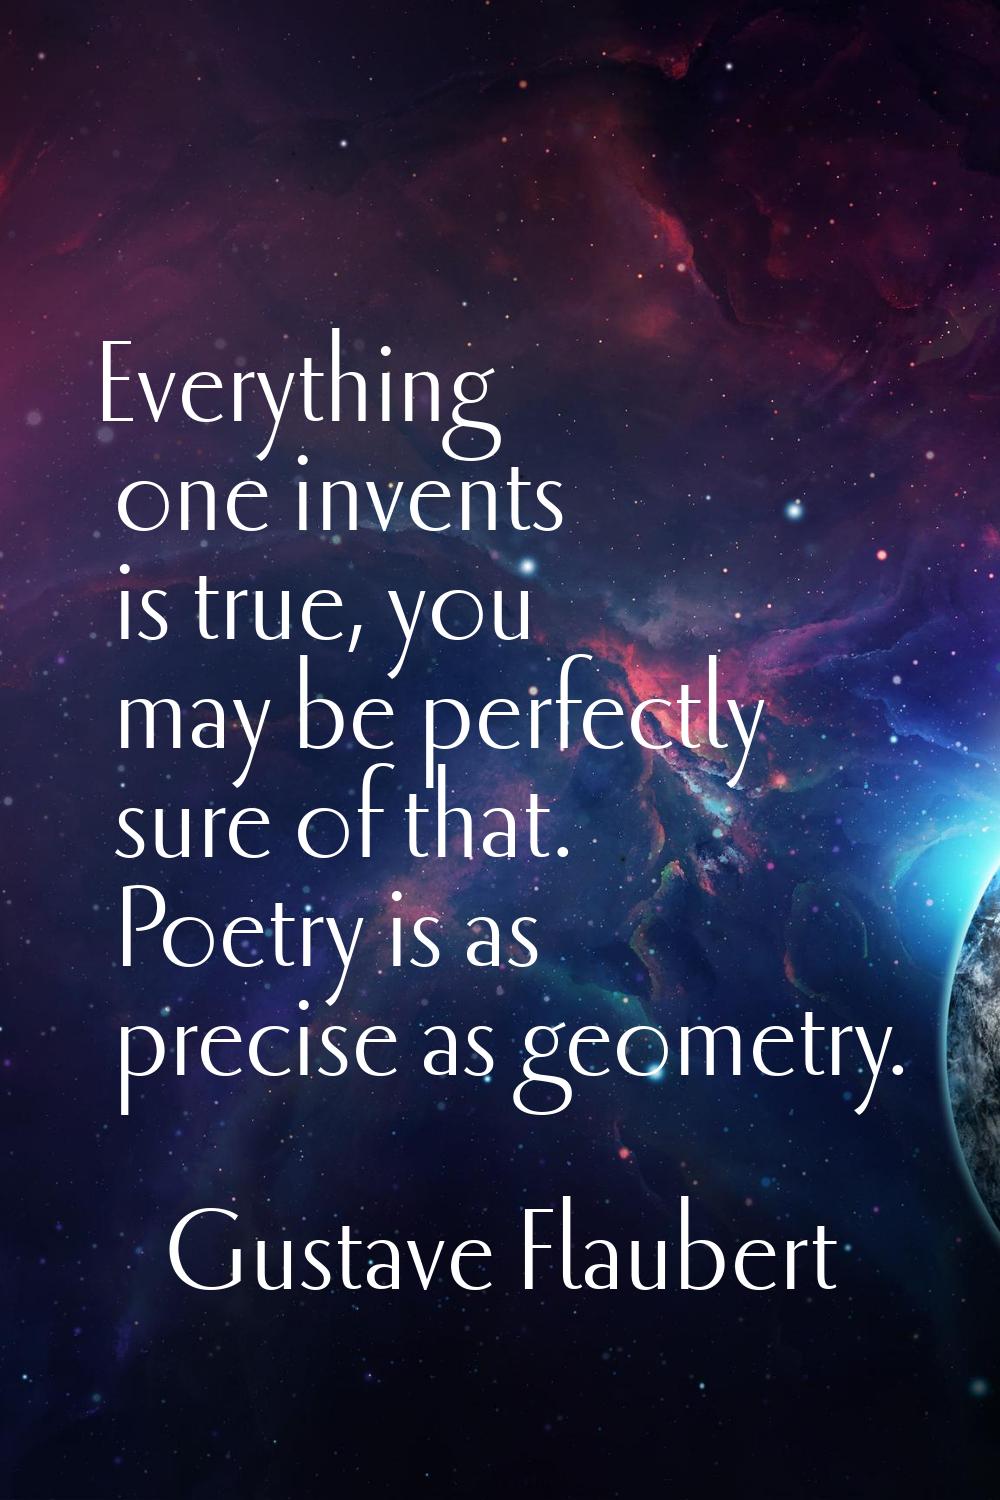 Everything one invents is true, you may be perfectly sure of that. Poetry is as precise as geometry